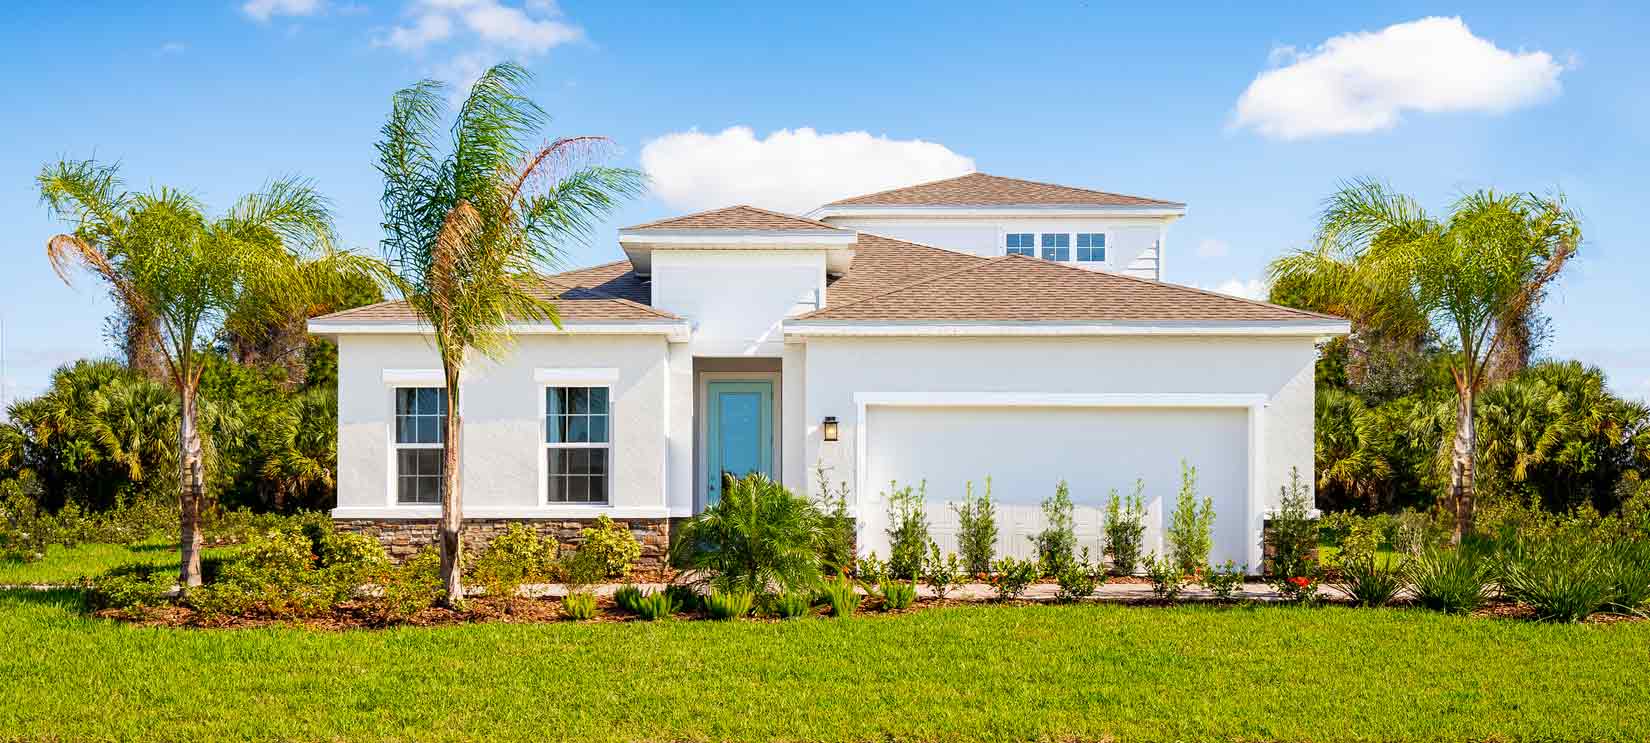 Ryan Homes Panama Model Coming Soon to West Port in Port Charlotte